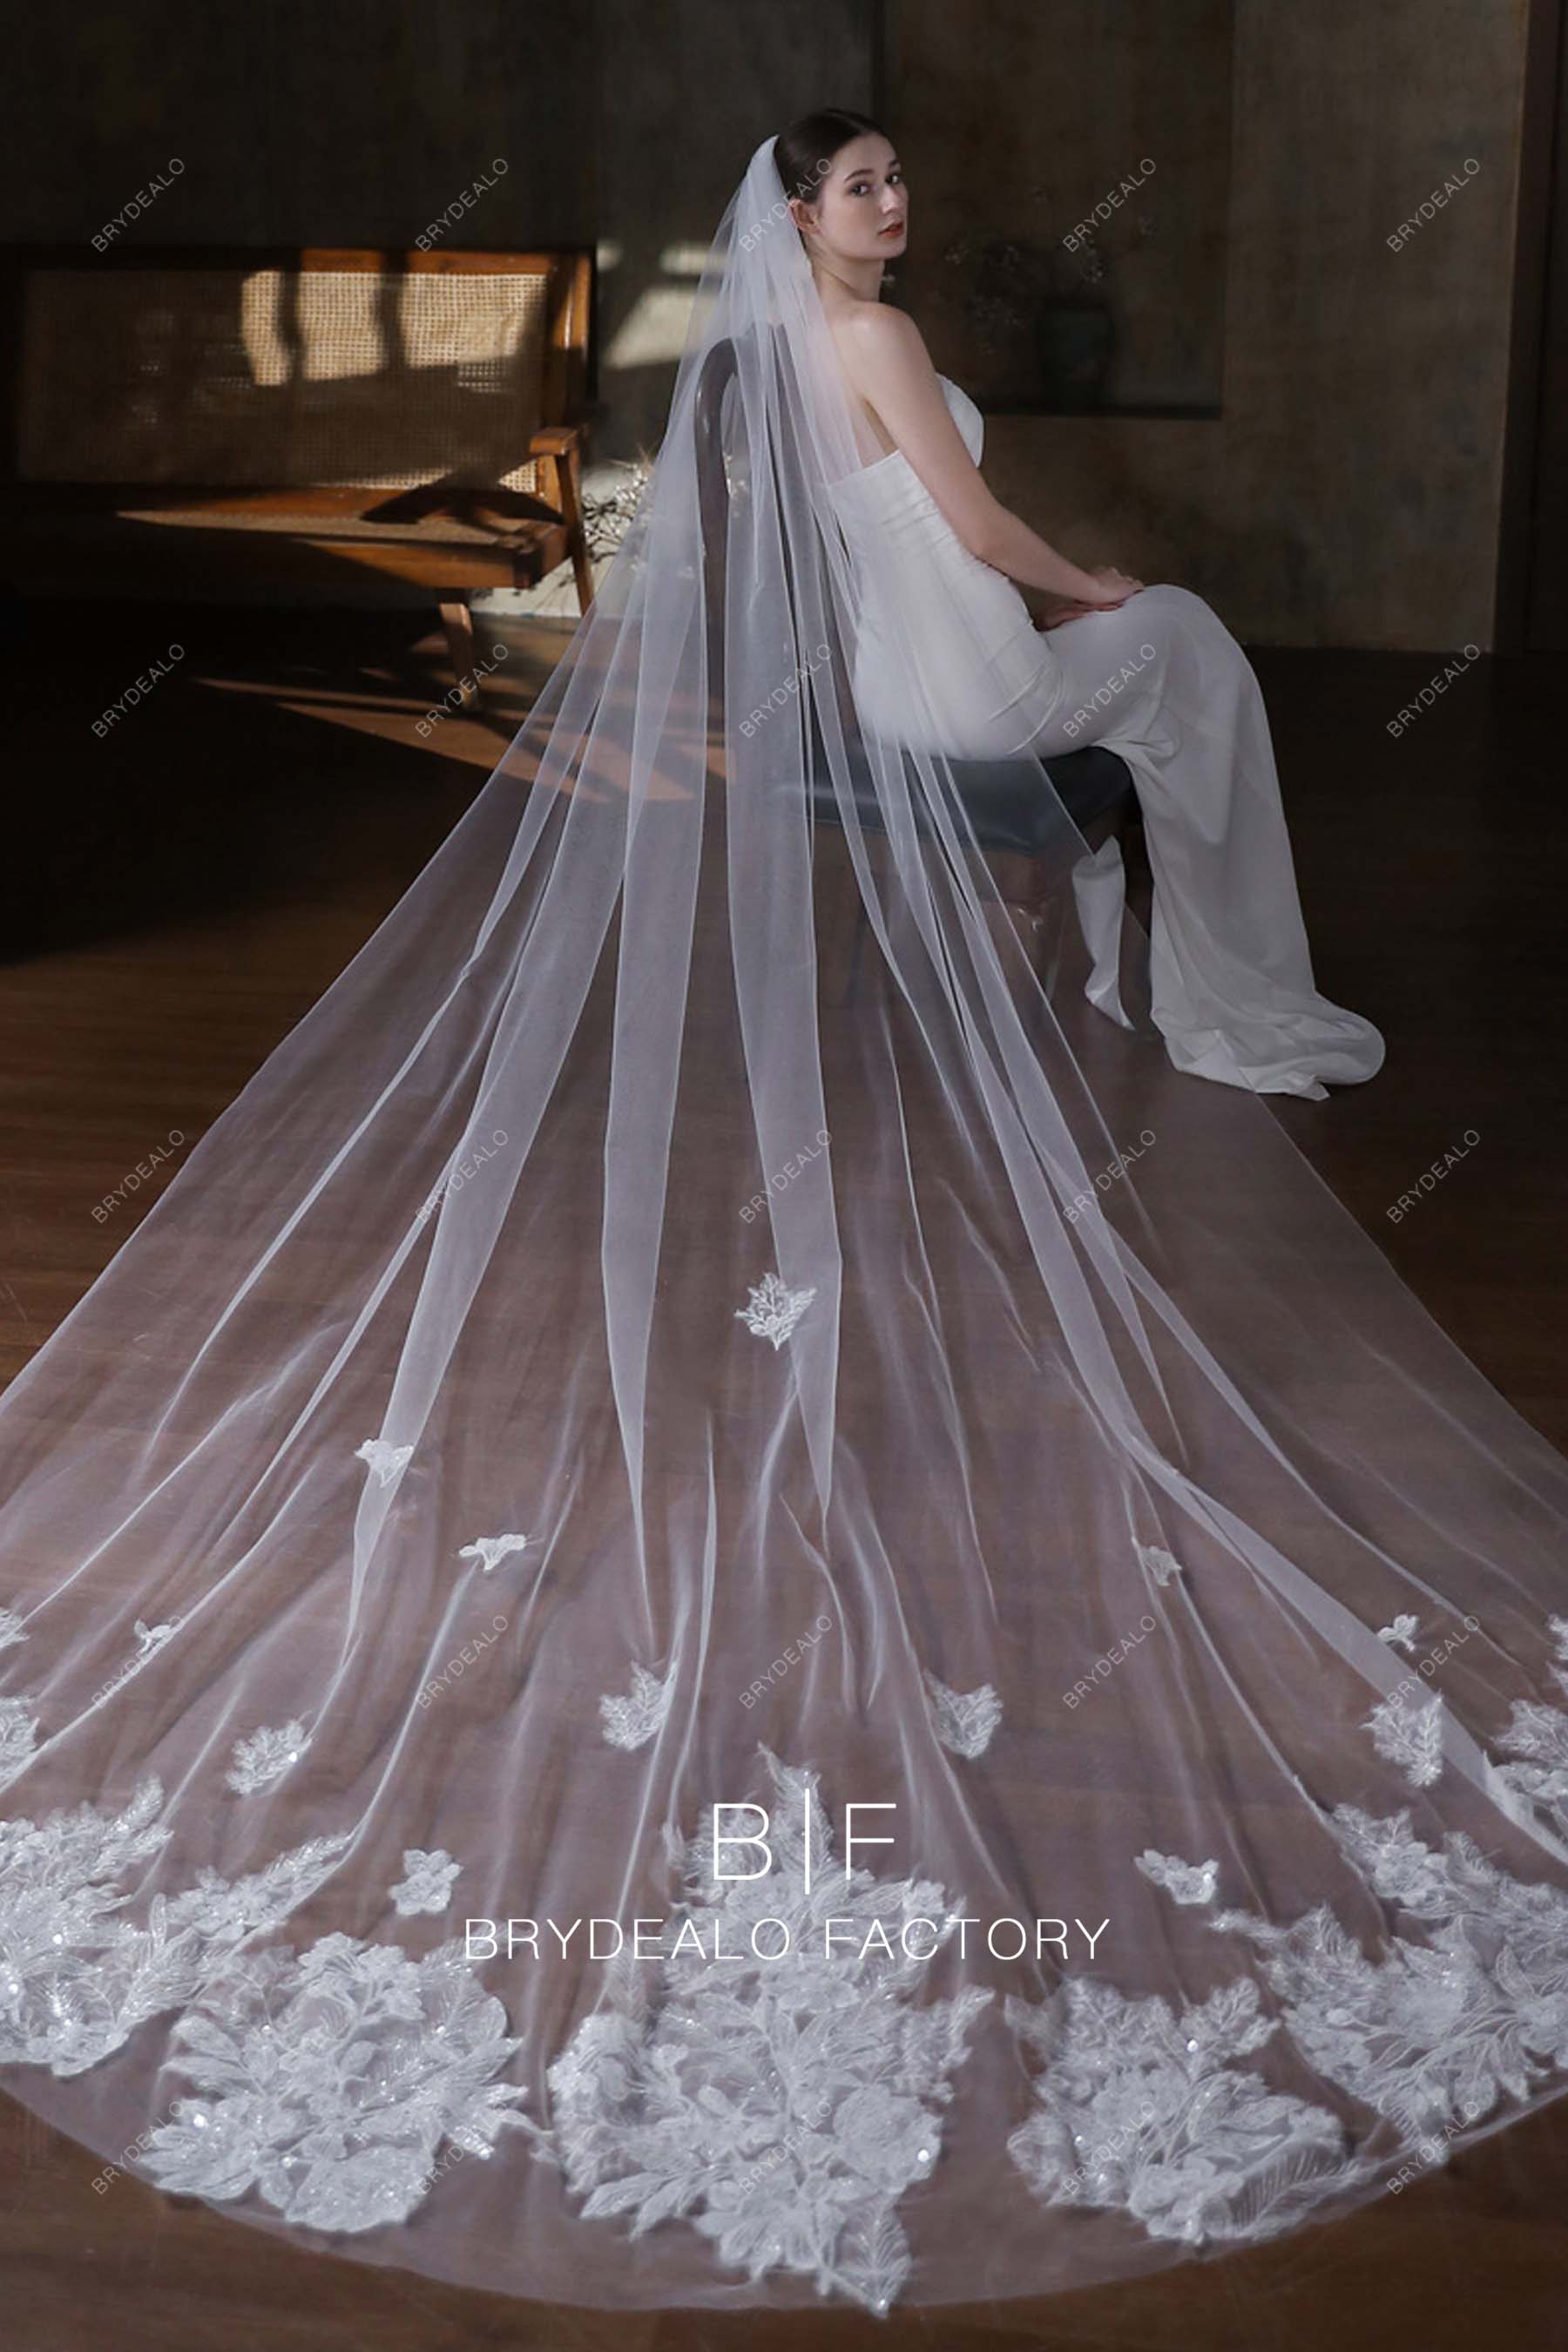 One Tier Sequin and Lace Cathedral Veil